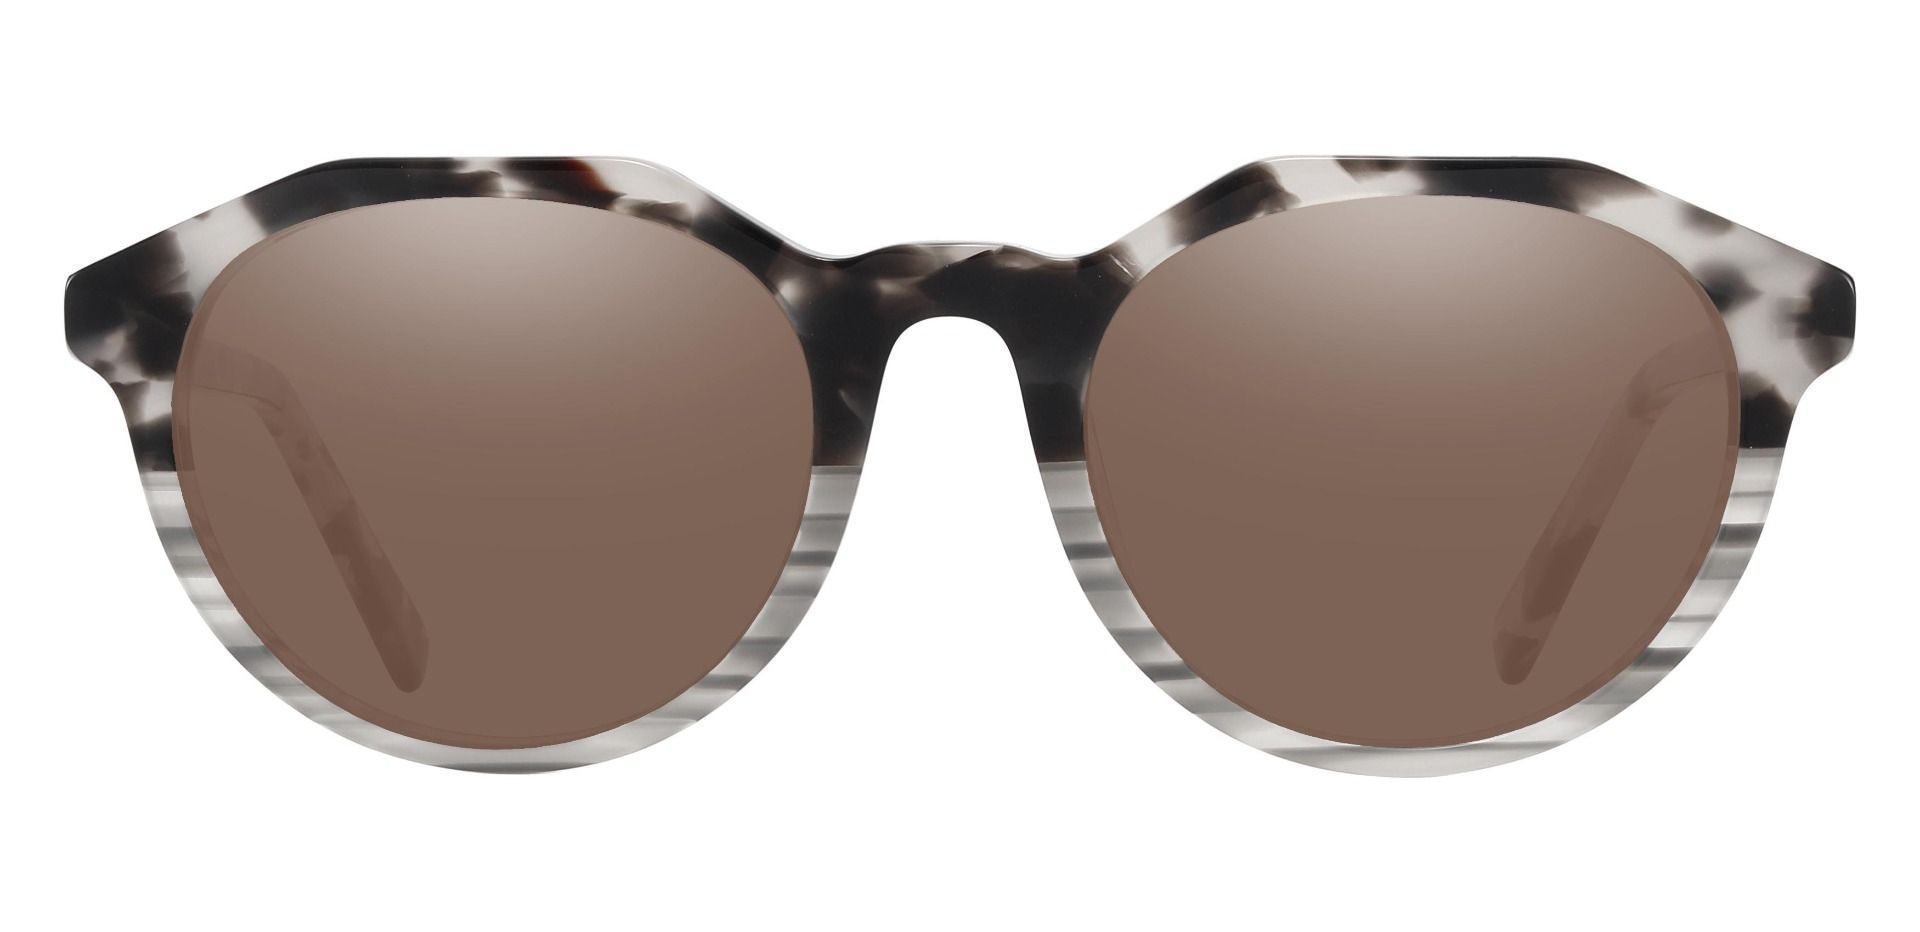 Mayfield Oval Lined Bifocal Sunglasses - Black Frame With Brown Lenses